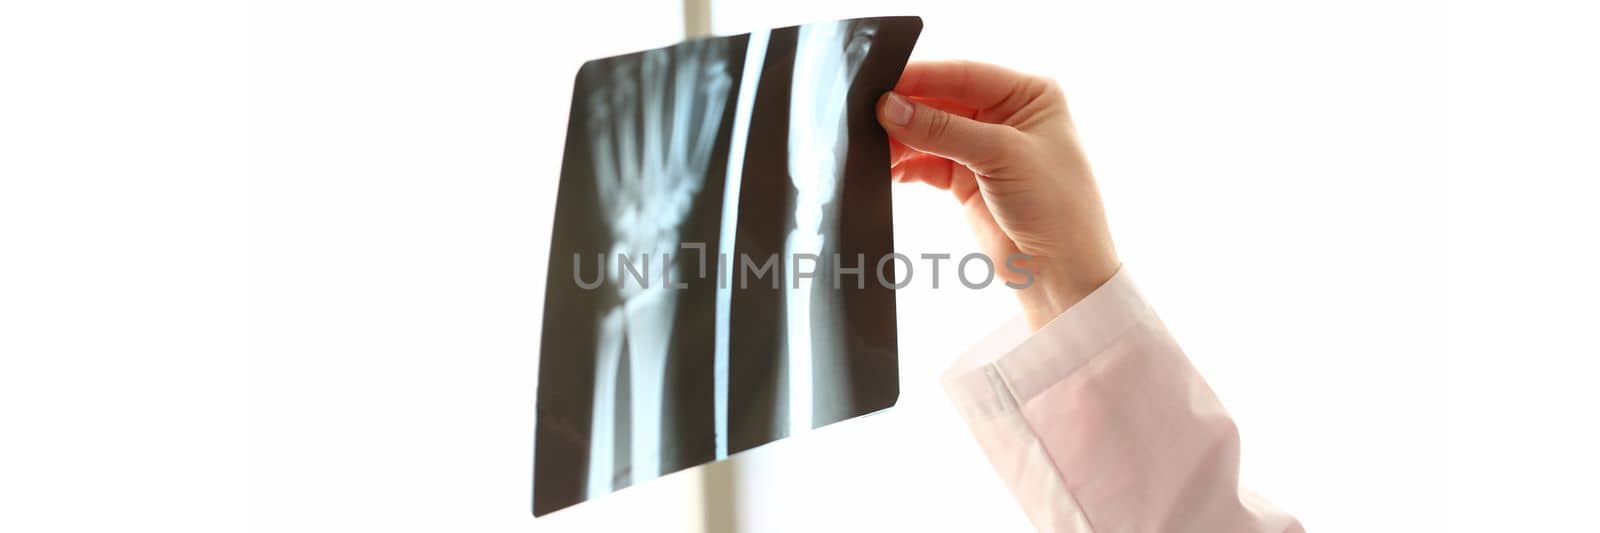 Orthopedic doctor examines image of hands on x-ray. Pain in joints of arm concept